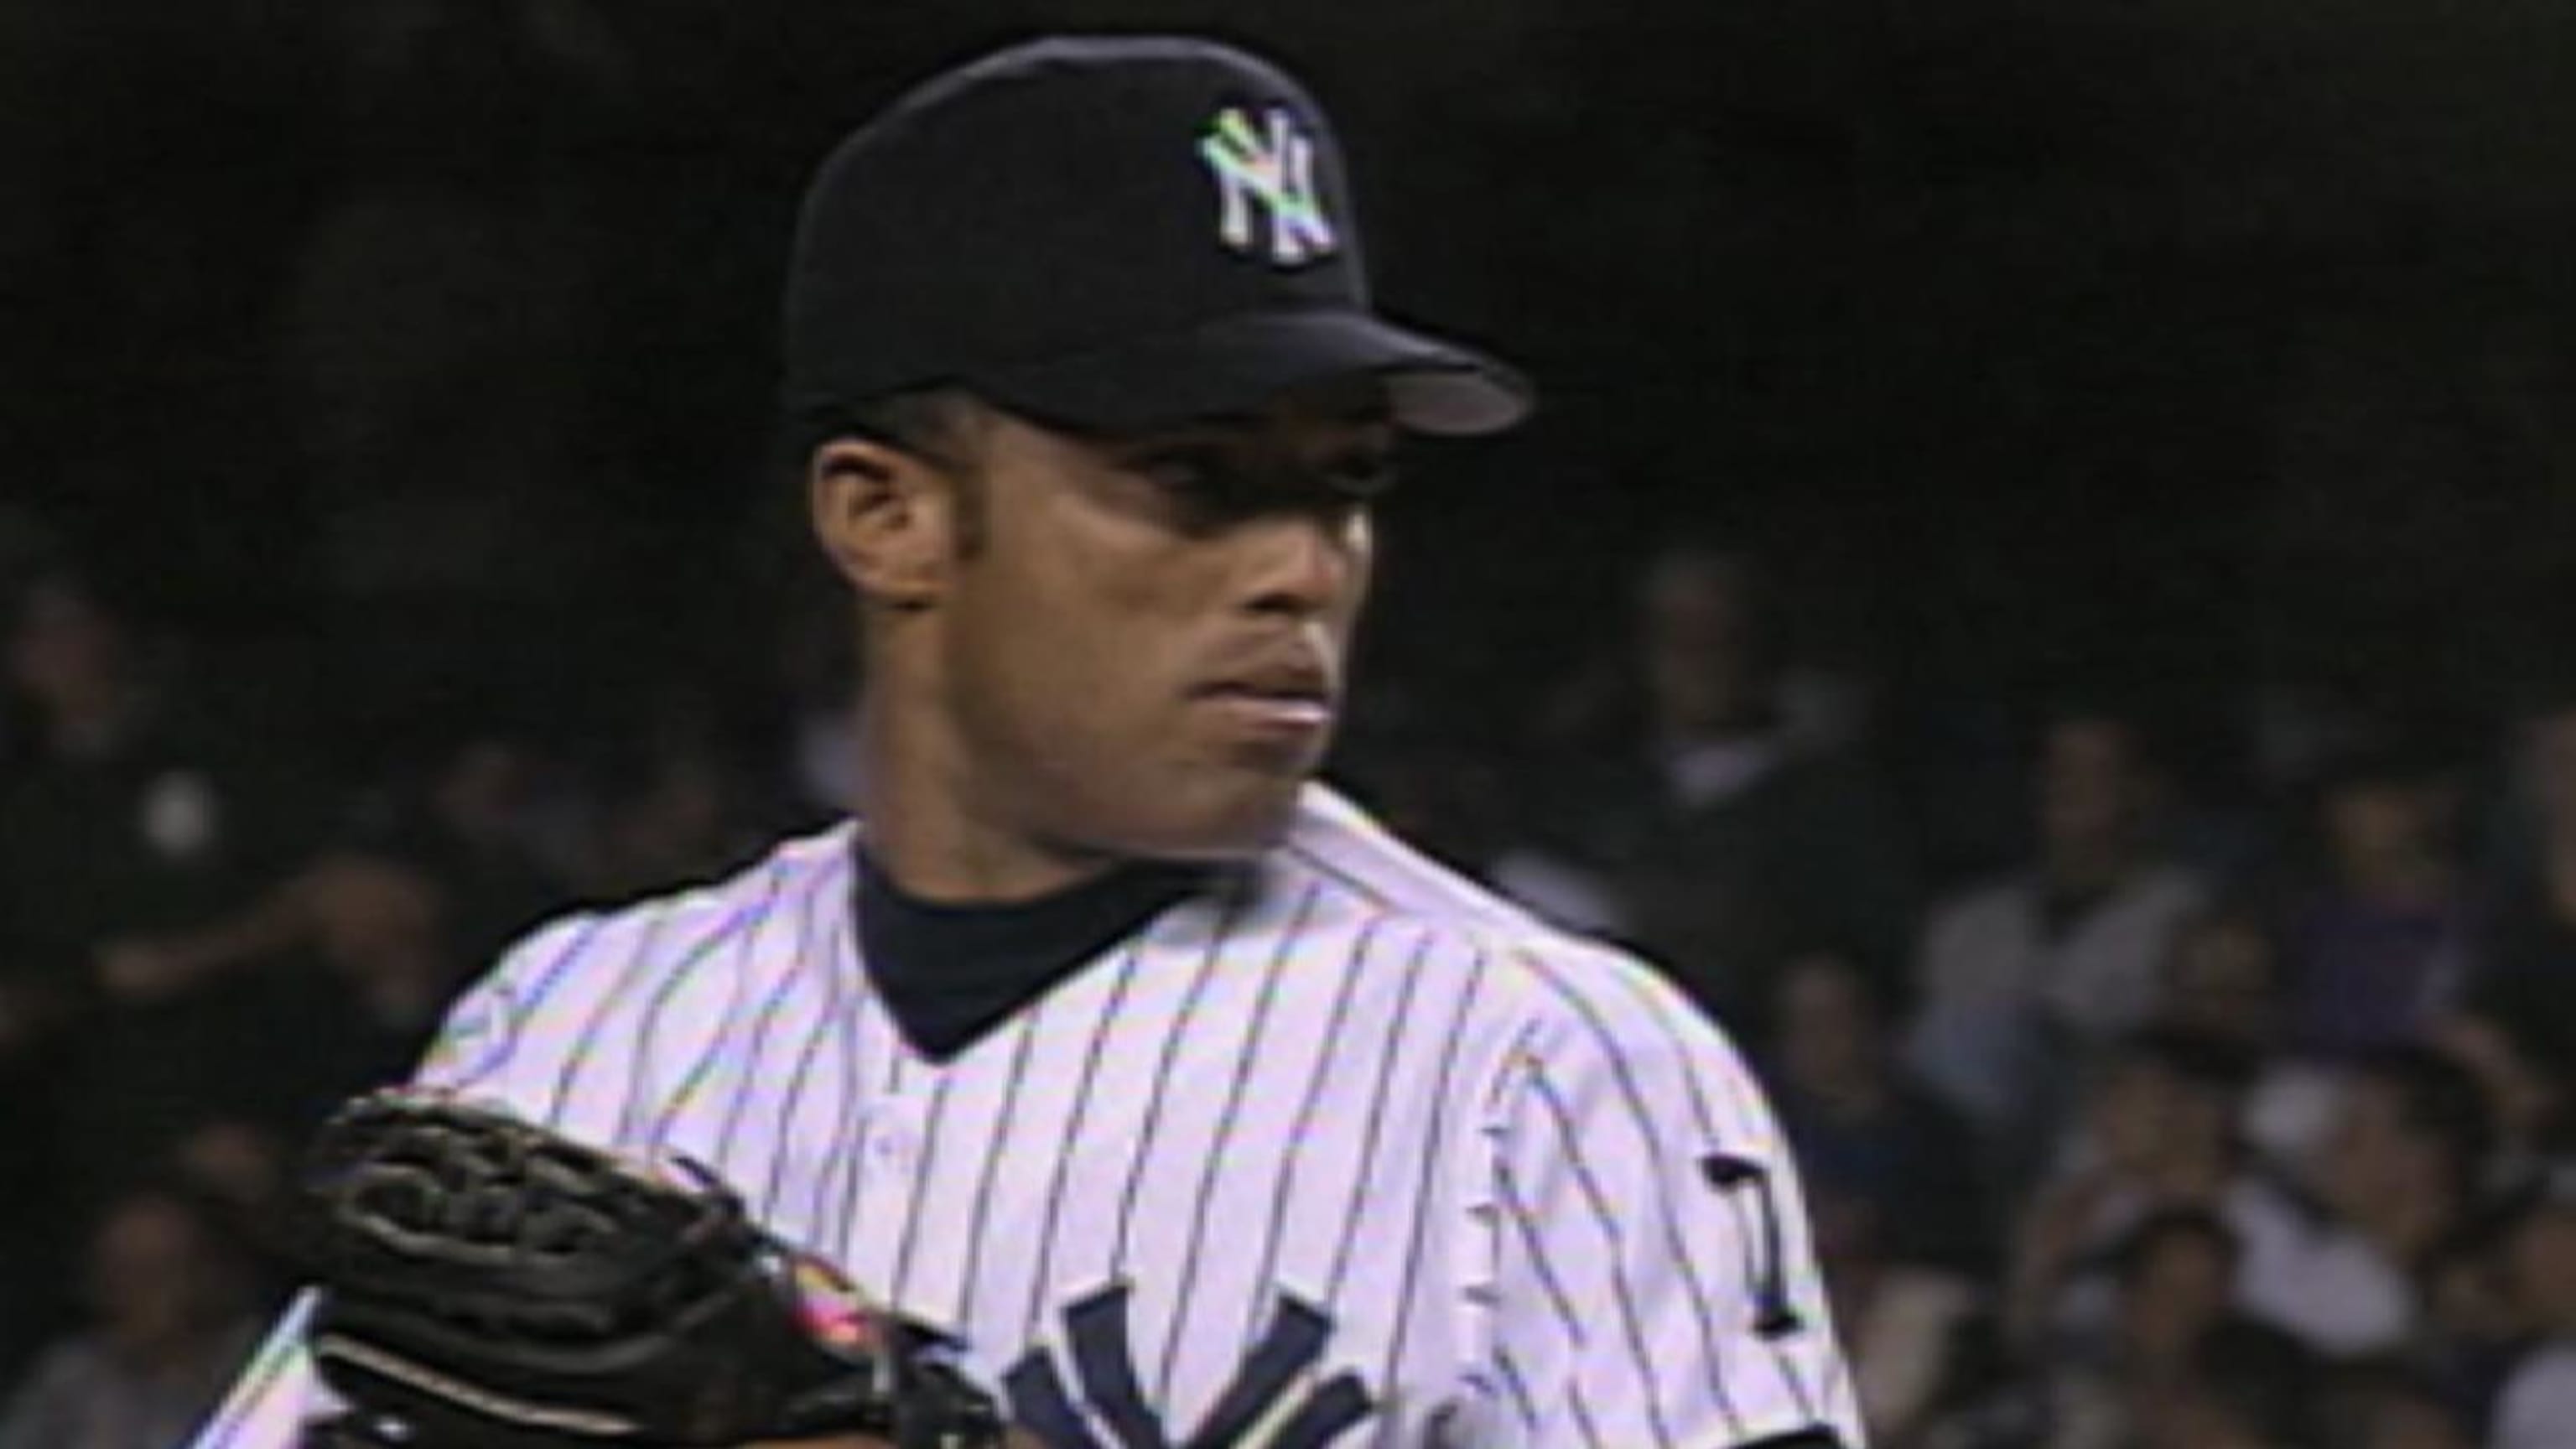 No Mo: Mariano Rivera's legendary career coming to an end